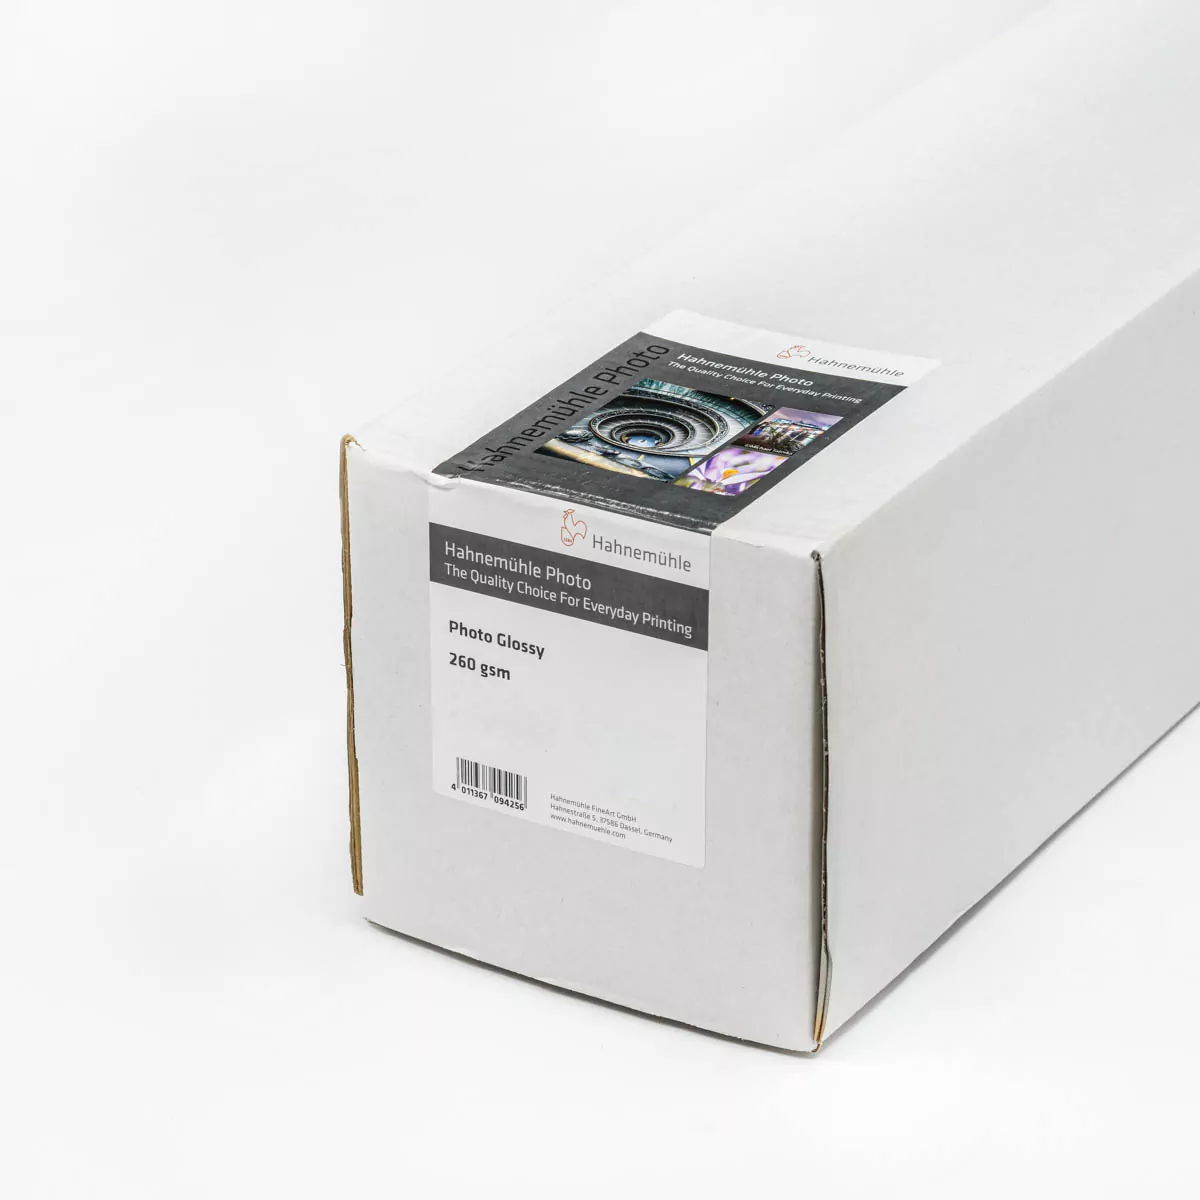 Hahnemuhle Photo Glossy 260 gsm 60”(152cm)x30m roll